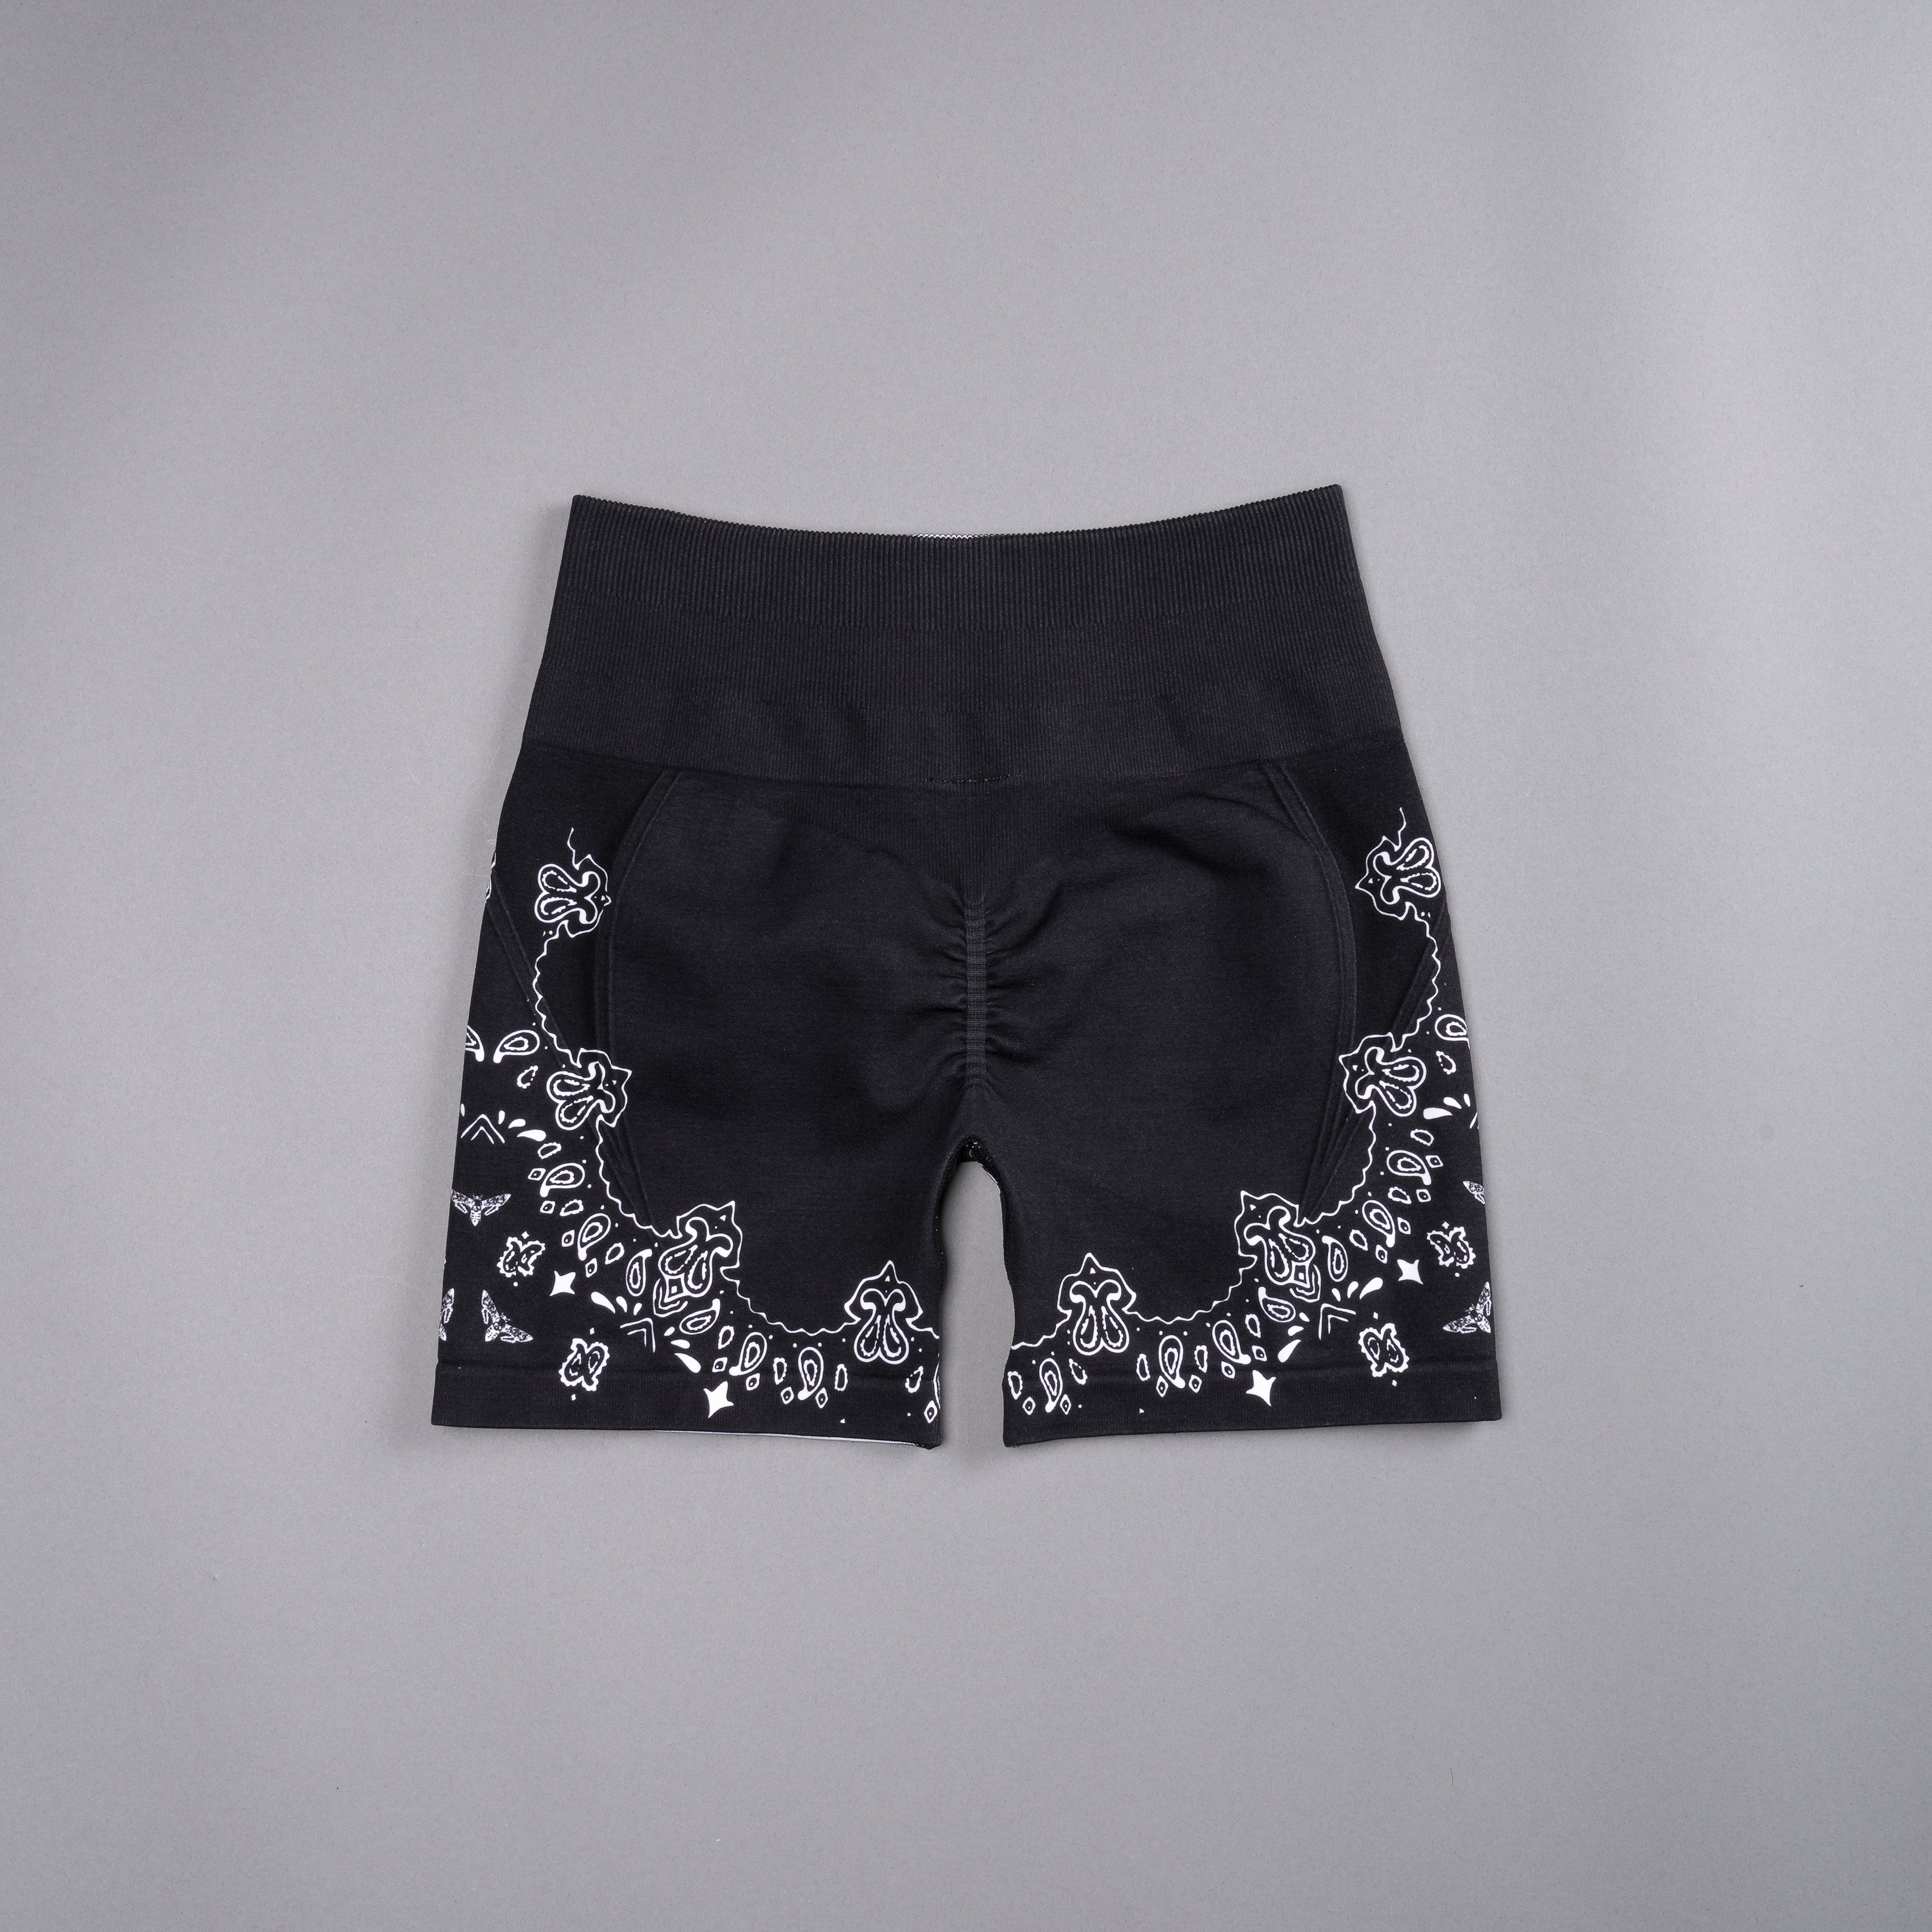 Western Wolves Everson Seamless "Huxley" Shorts in Black Darc Paisley